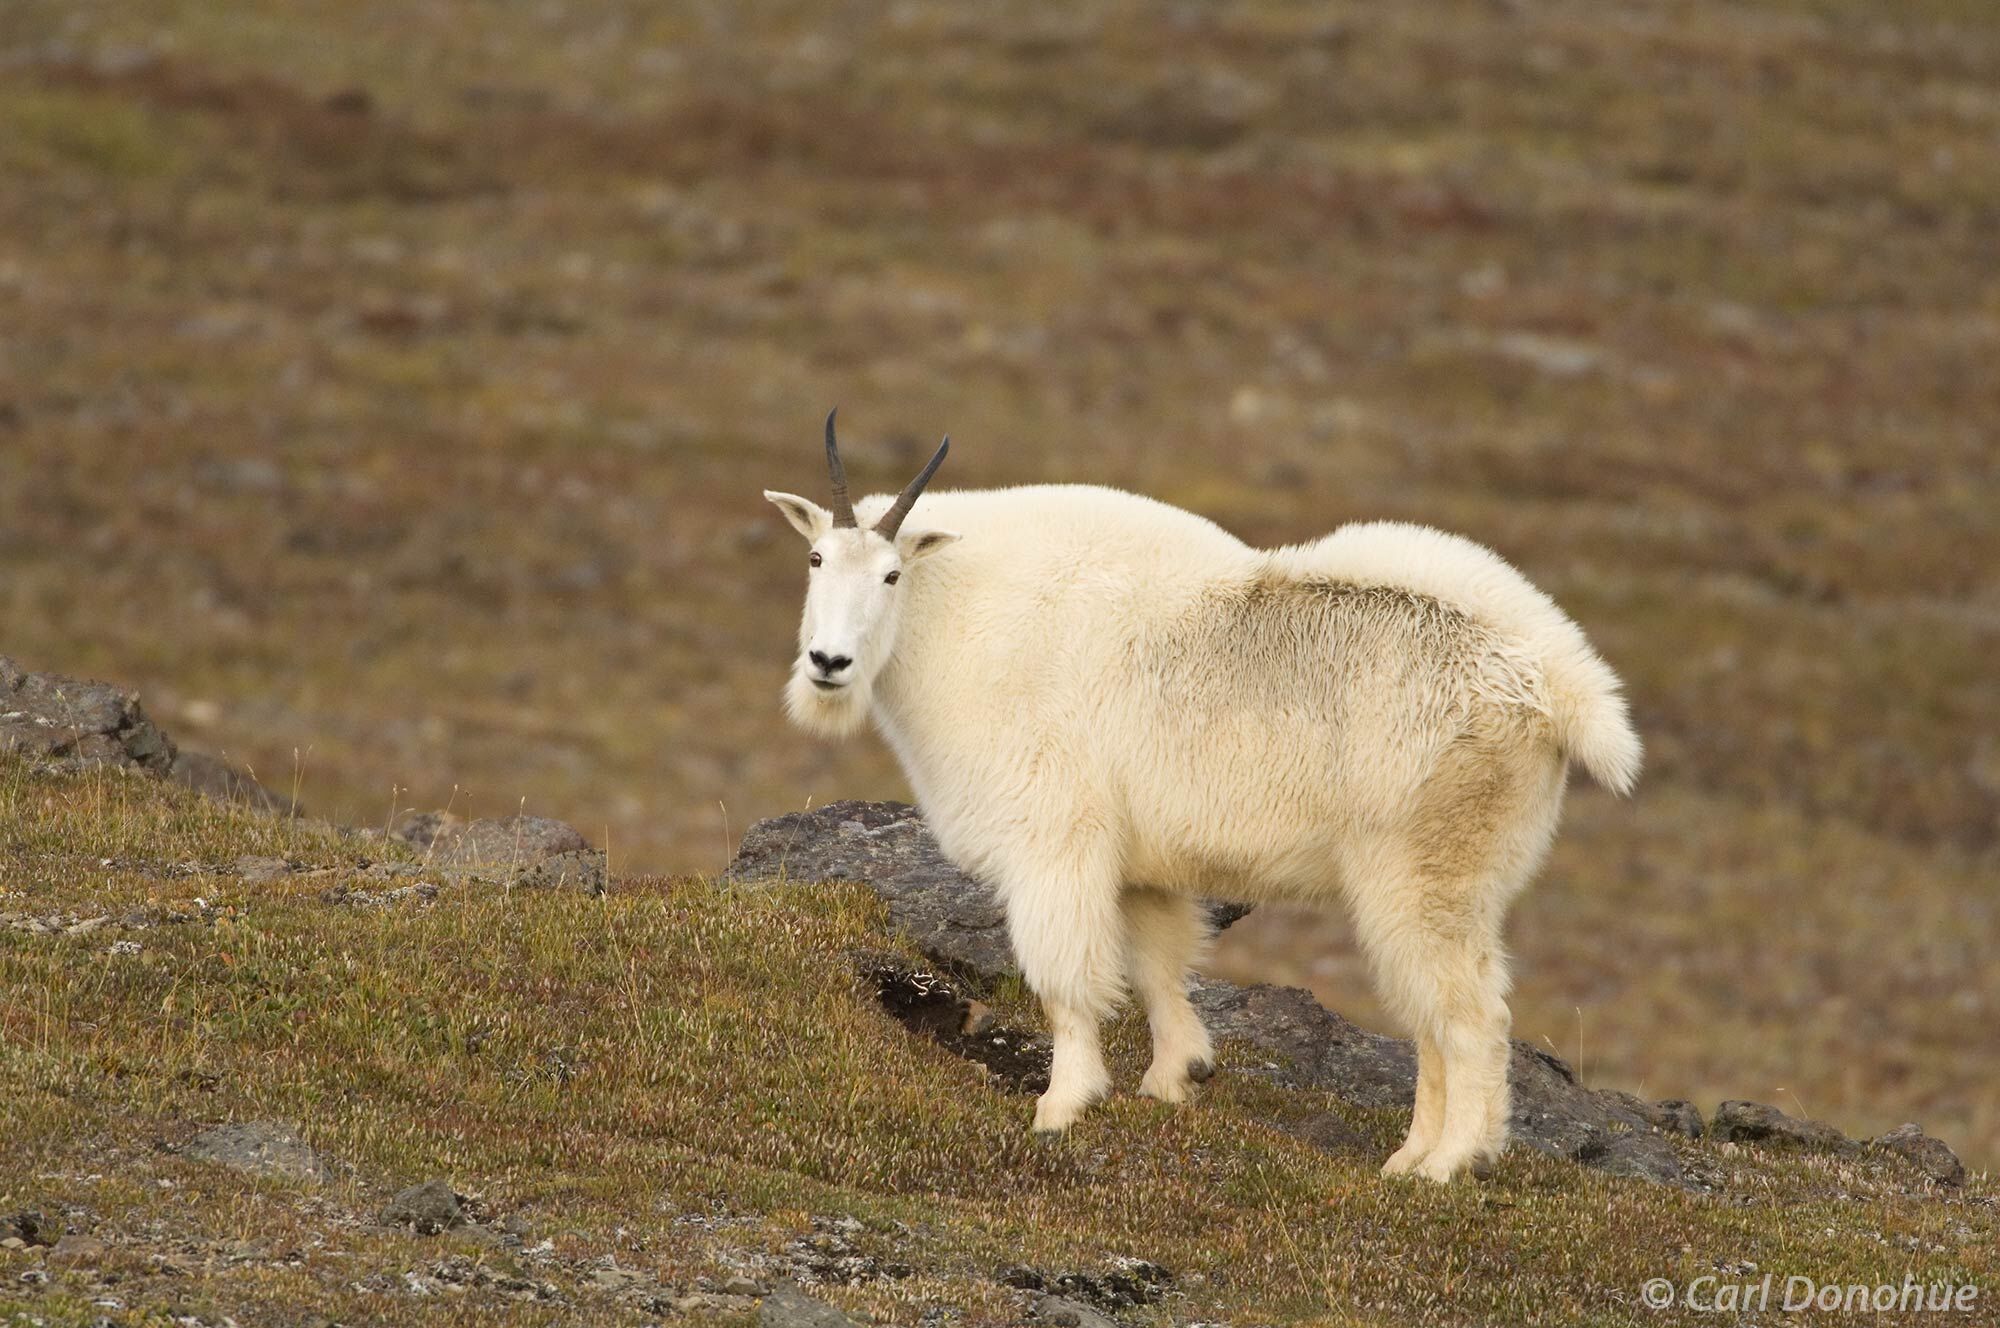 Despite the harsh conditions of the national park, the mountain goat thrives in its natural environment, using its skills and...